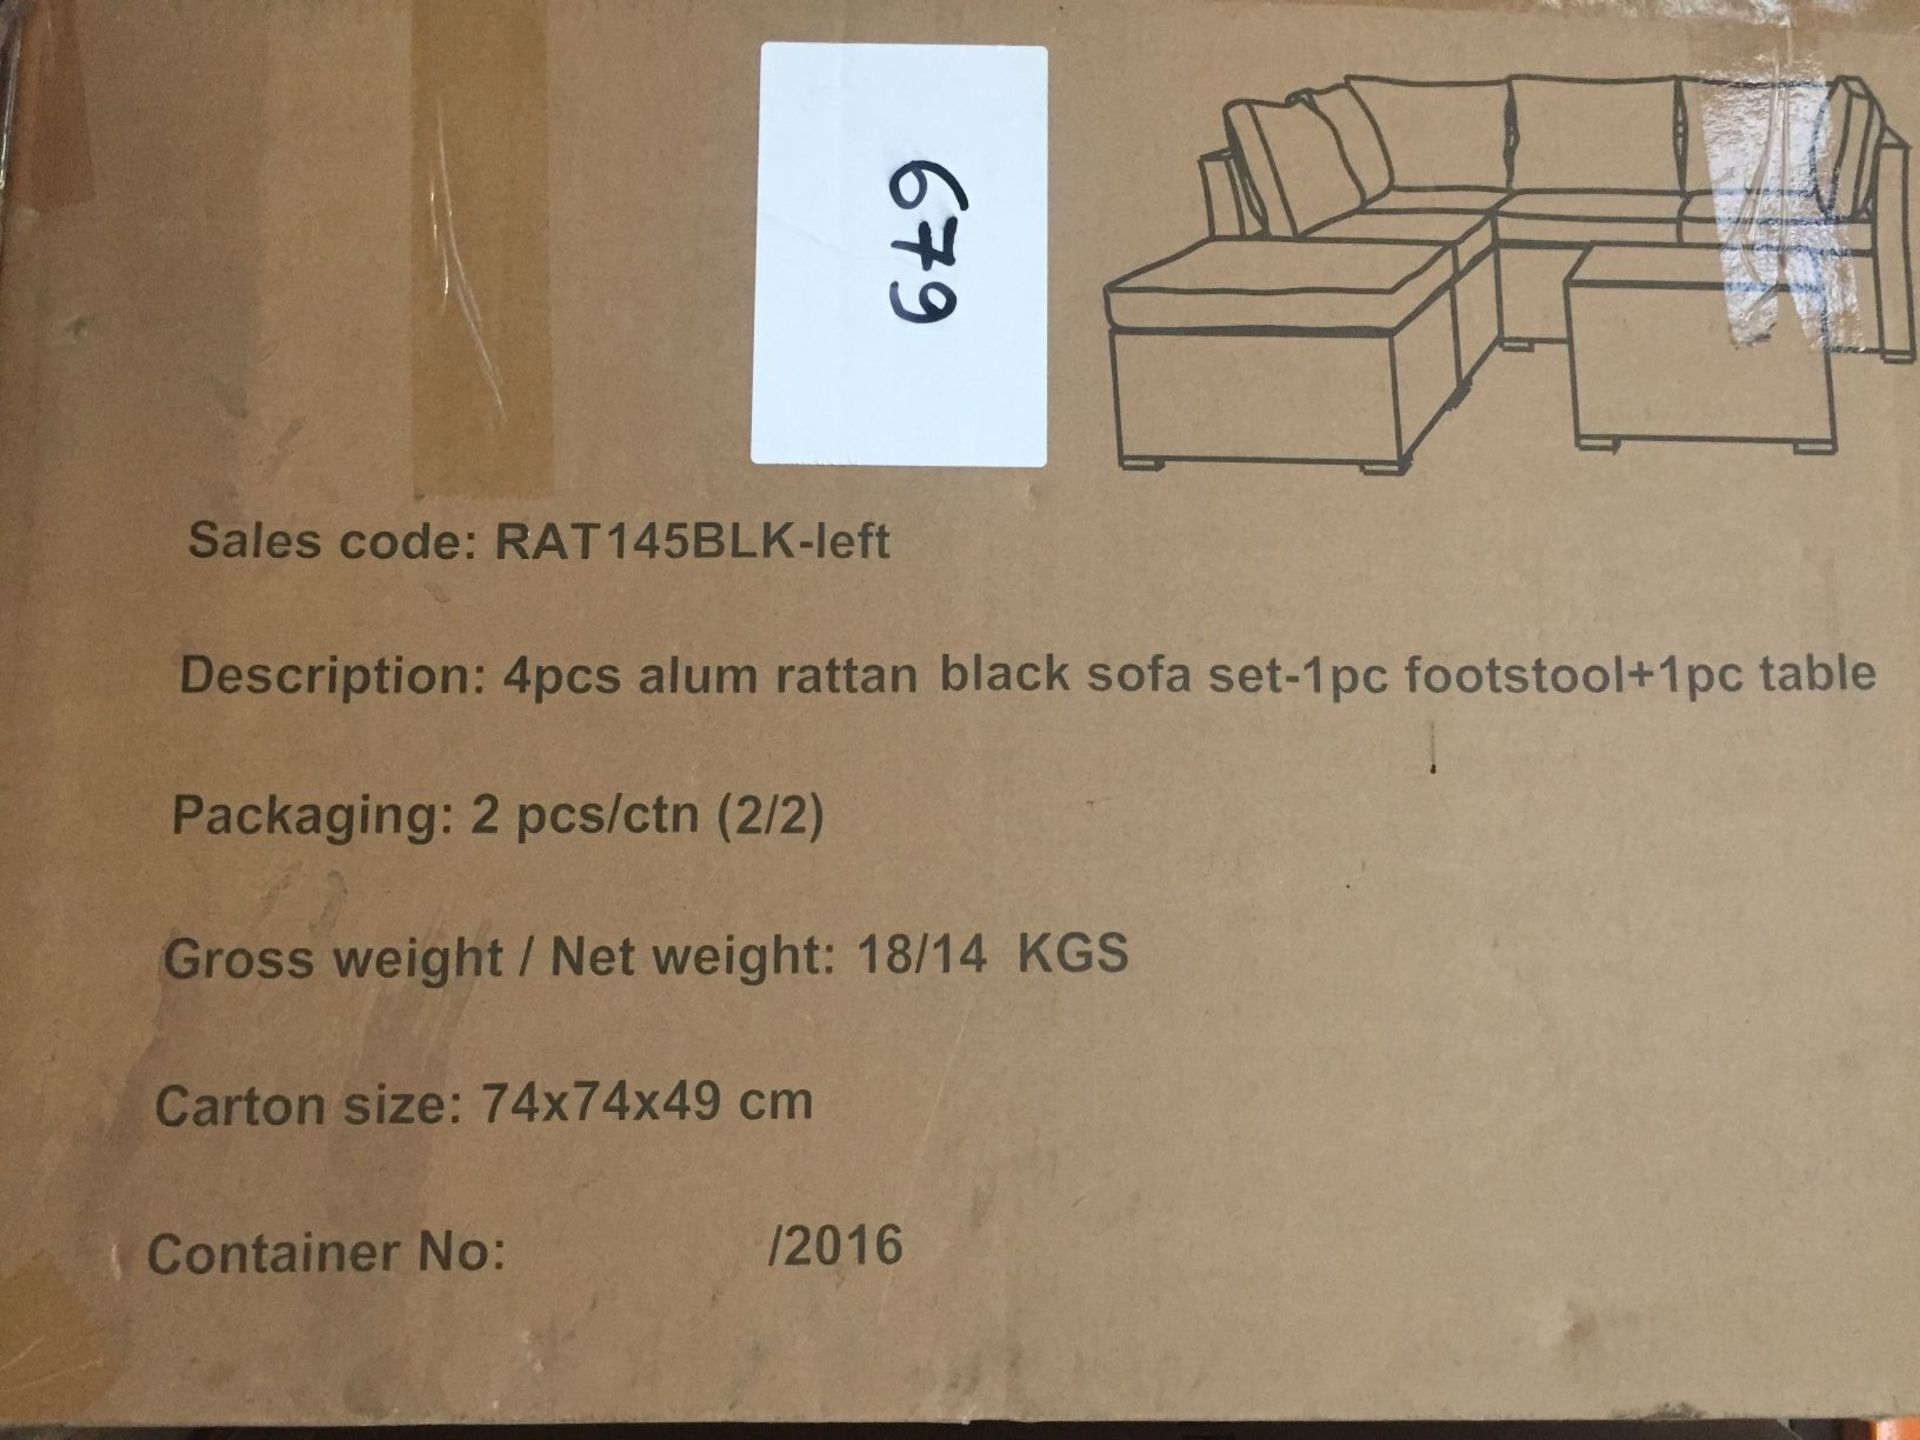 1 LOT TO CONTAIN ALUMINIUM BLACK RATTAN SOFA SET (CONTAINS 1 TABLE WITH GLASS AND 1 FOOTSTOOL ) -